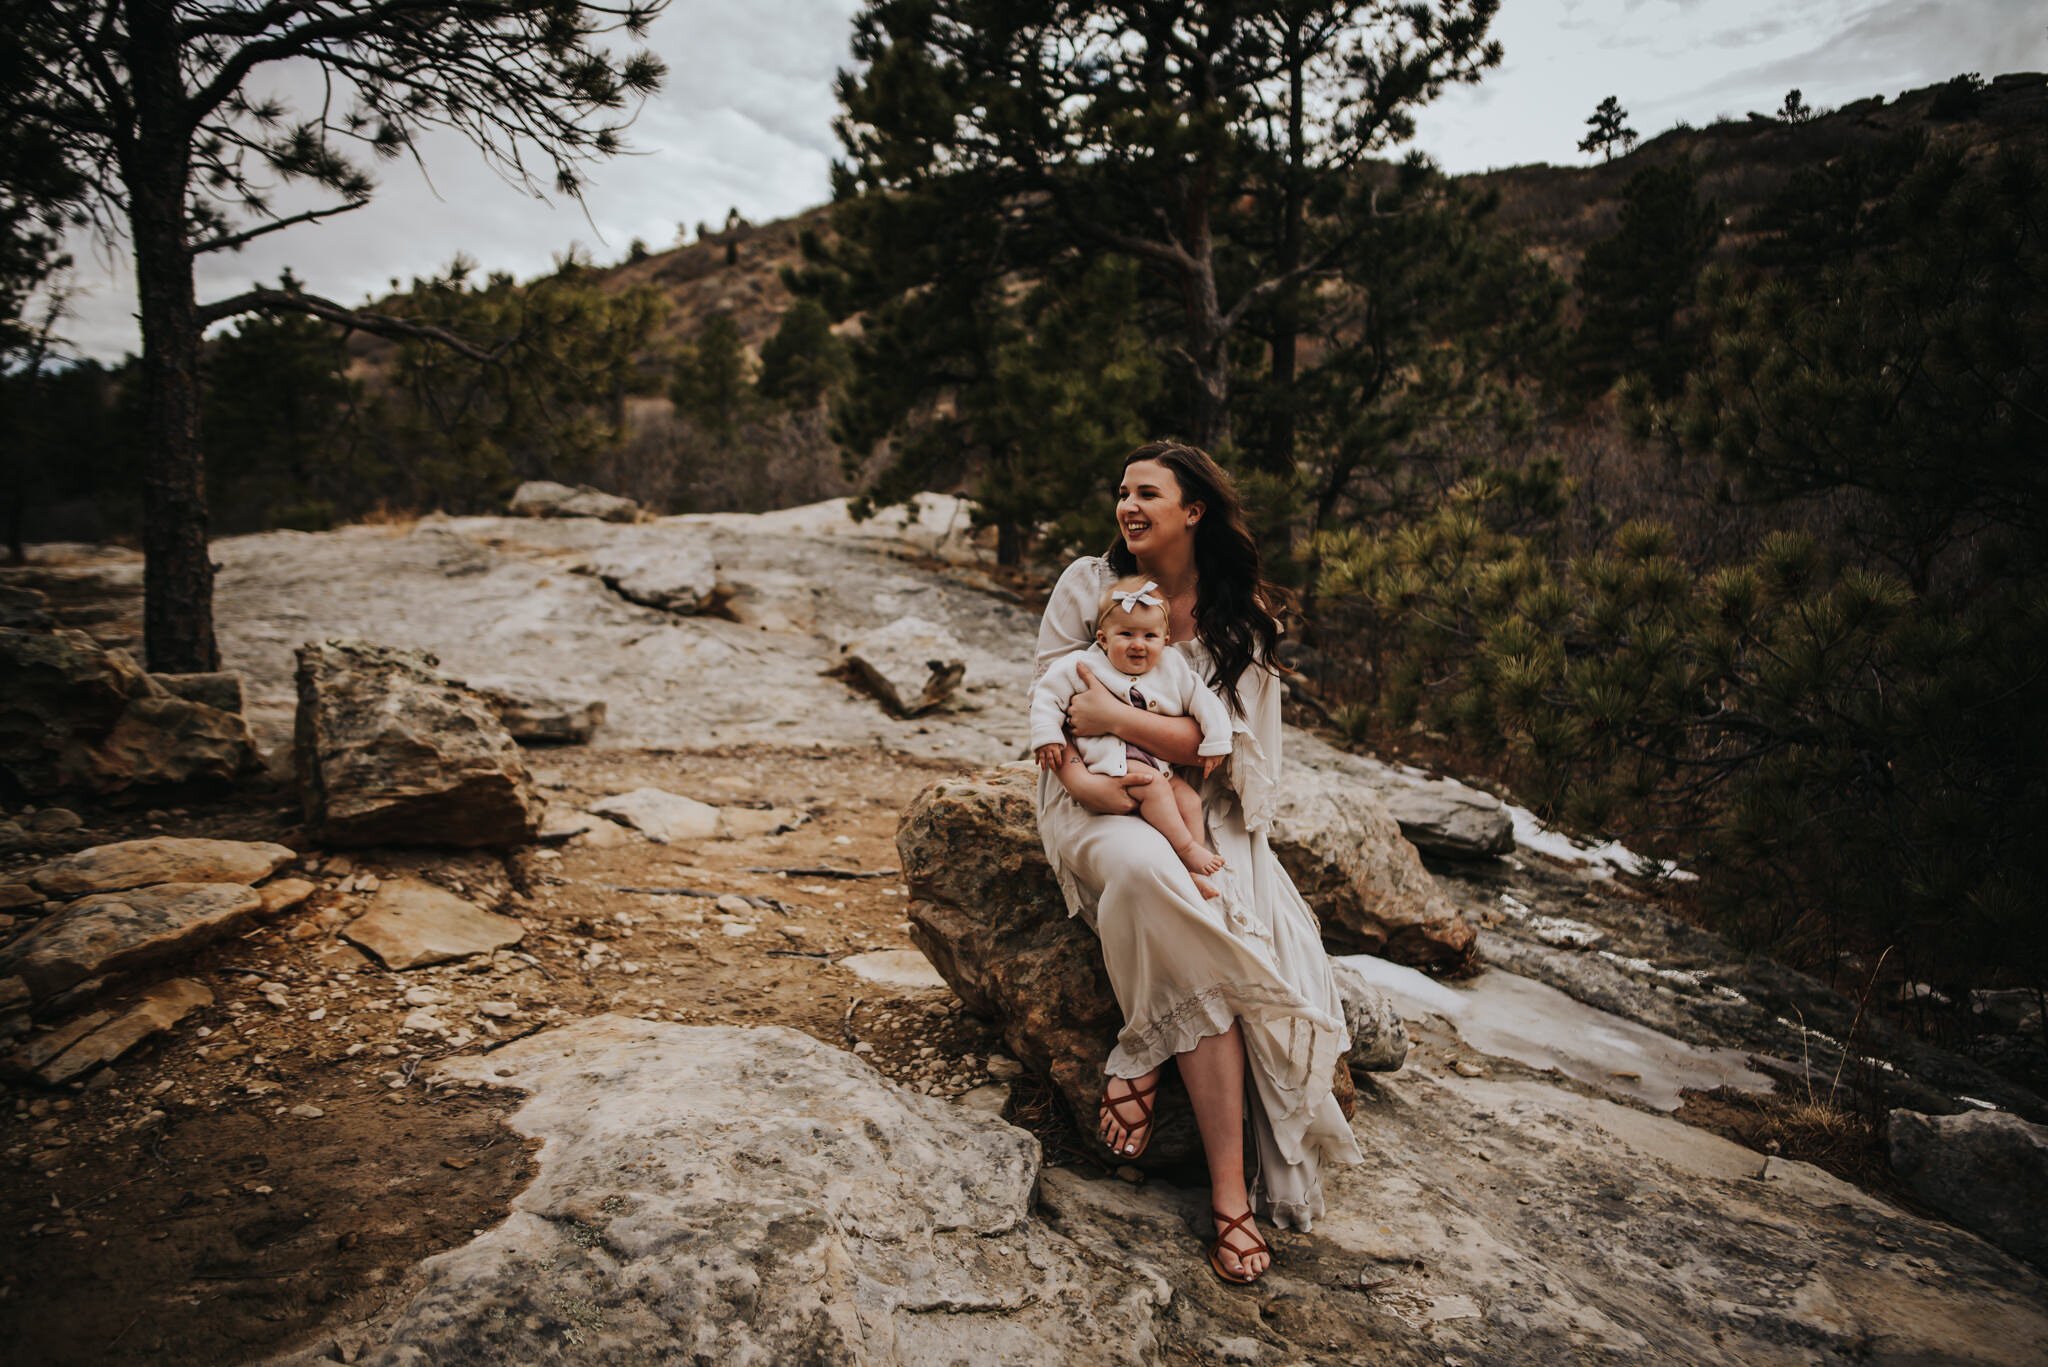 Miller+Family+Session+Mentorship+Colorado+Springs+Colorado+Sunset+Ute+Valley+Park+Mountains+Fields+Mom+Dad+Son+Daughter+Baby+Wild+Prairie+Photography-16-2020.jpeg